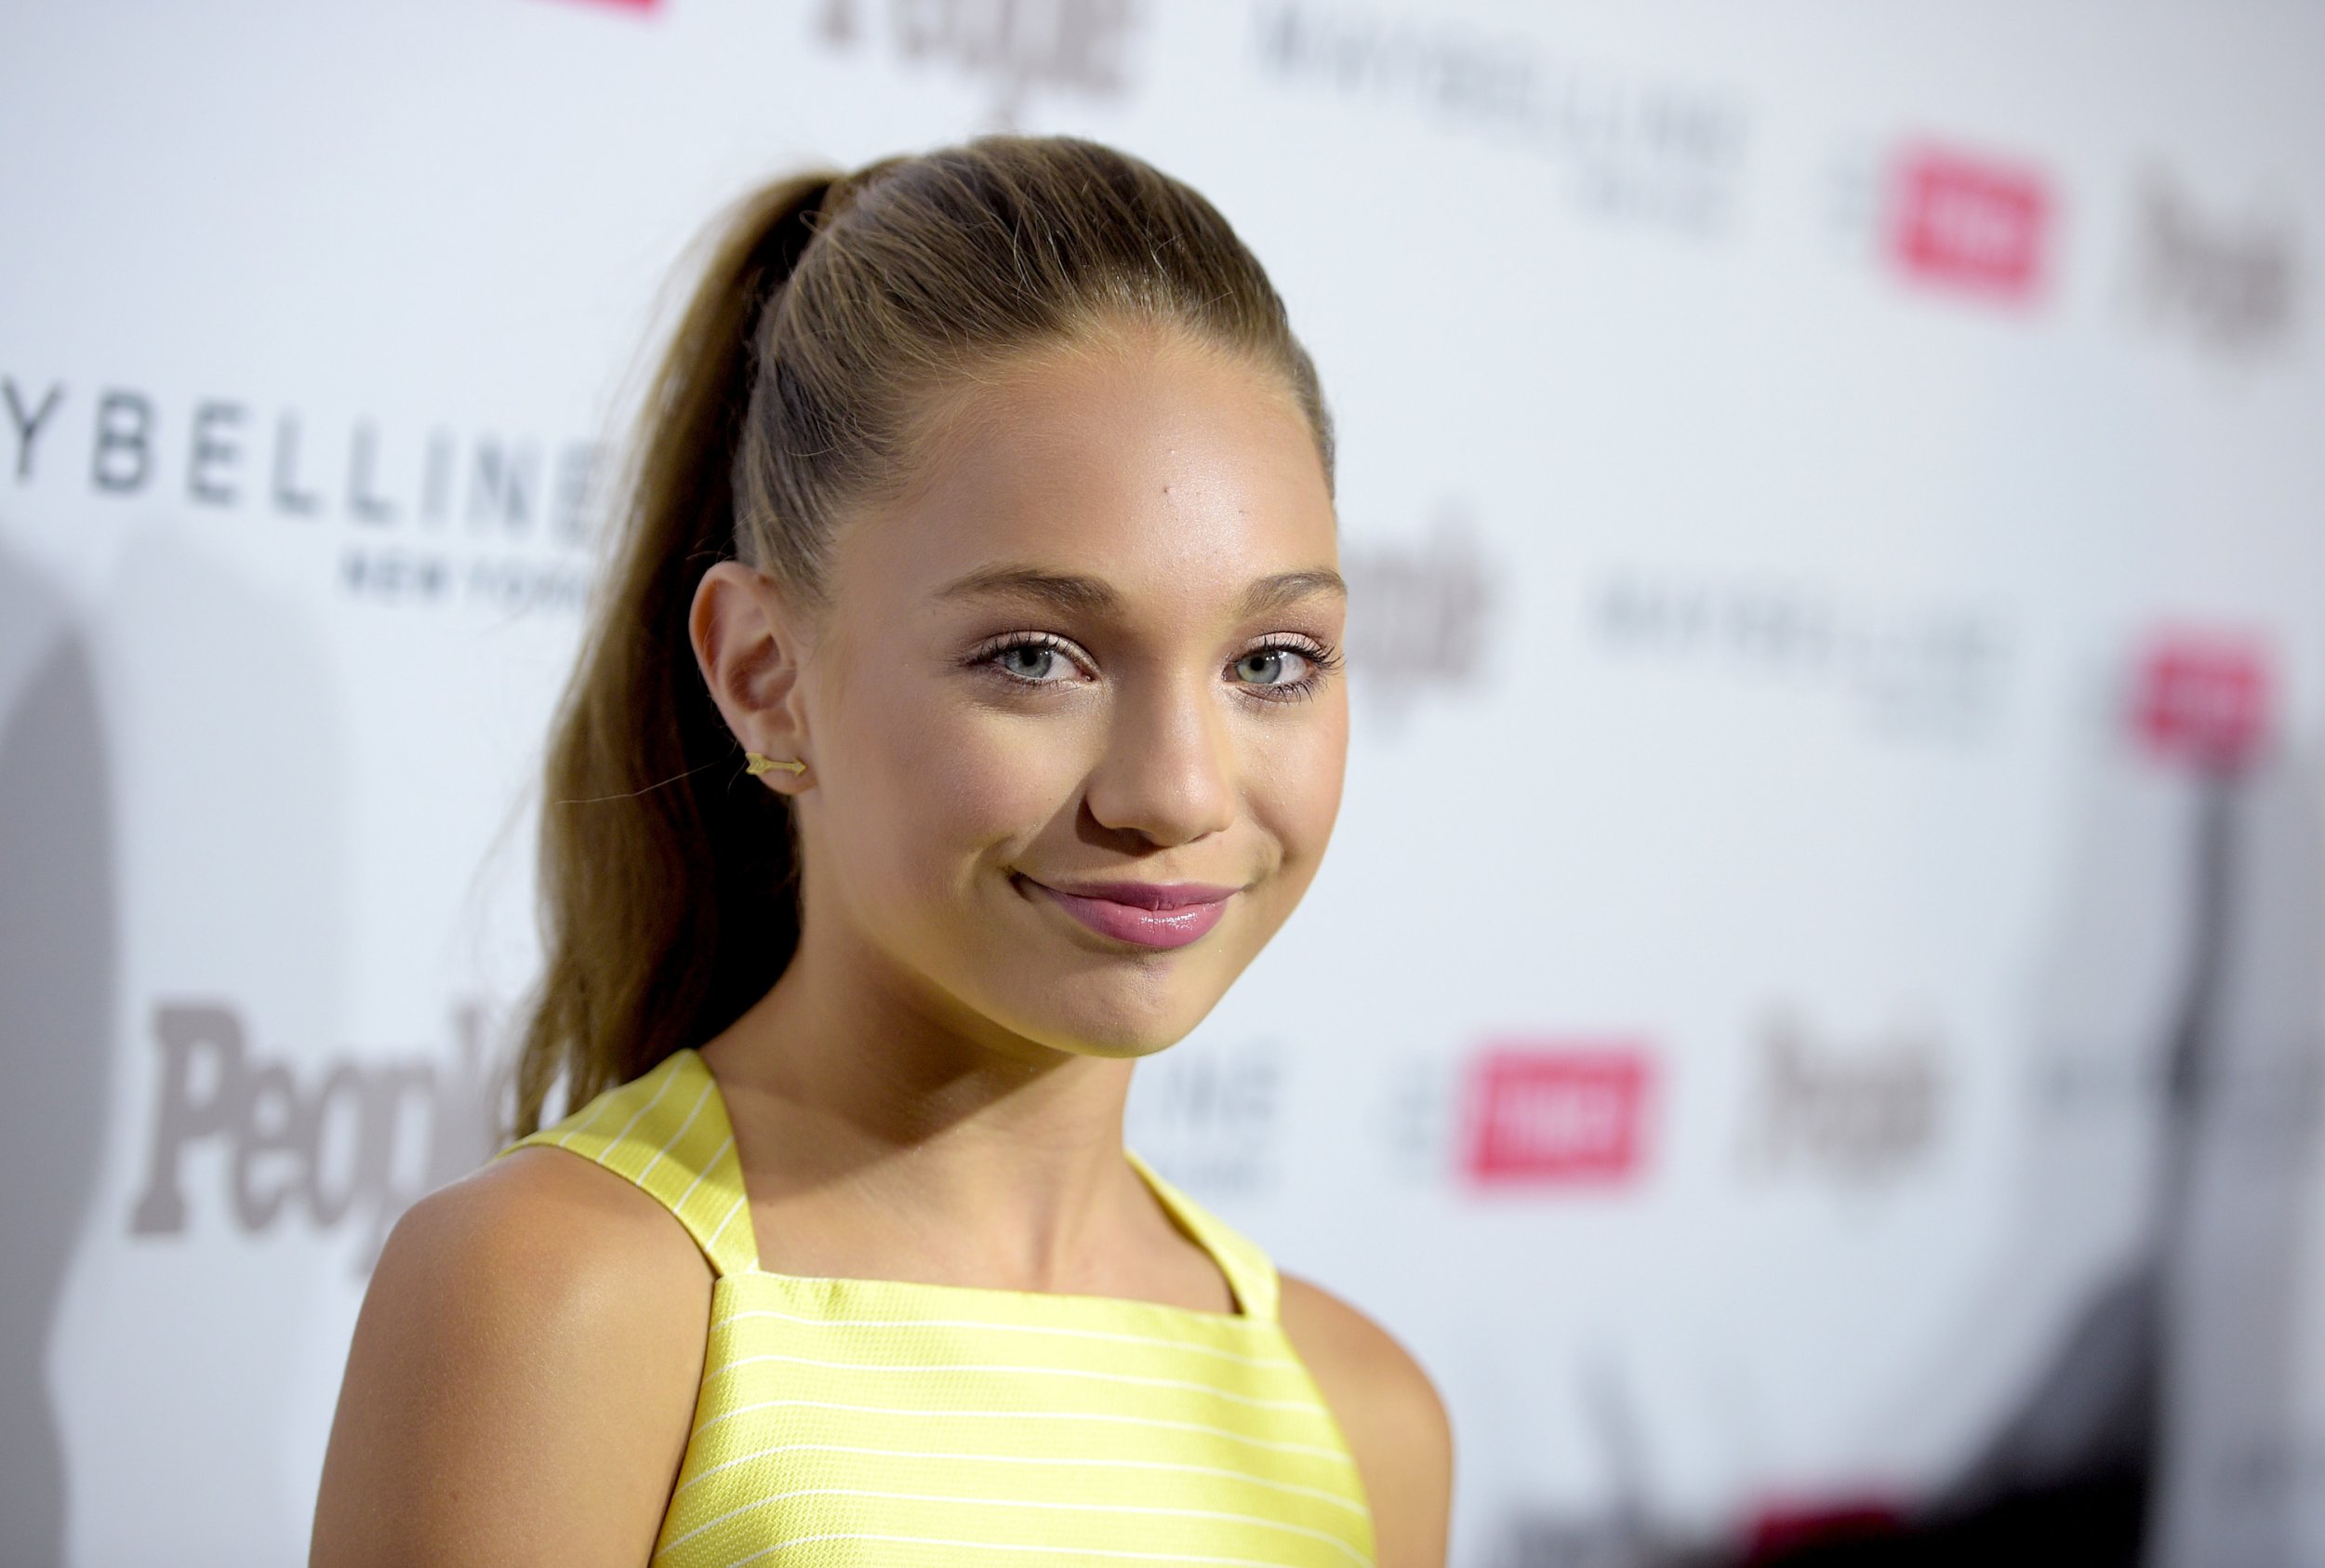 Maddie Ziegler Listed As Dance Moms Season 6 Cast Member In Girl Talk Filming Announcement 5830